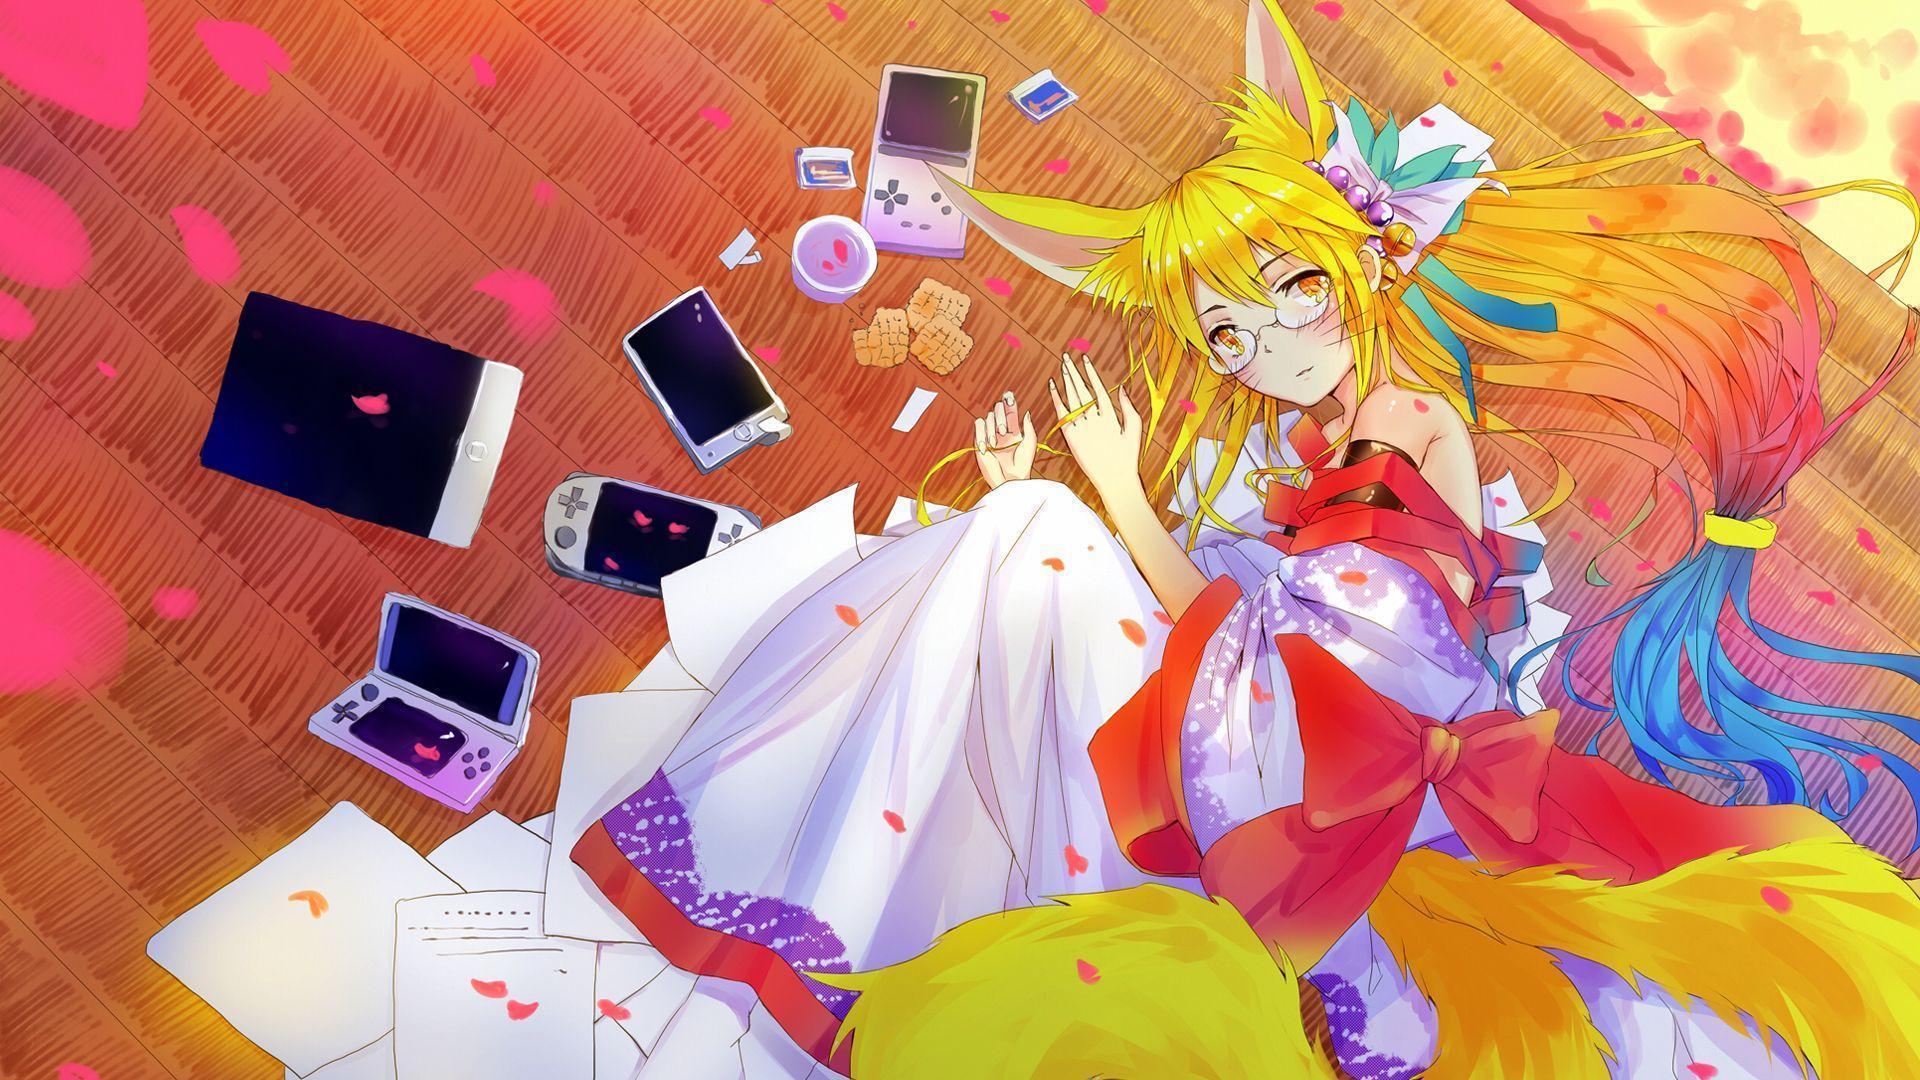 Mind Blowing No Game No Life Wallpaper For iPad